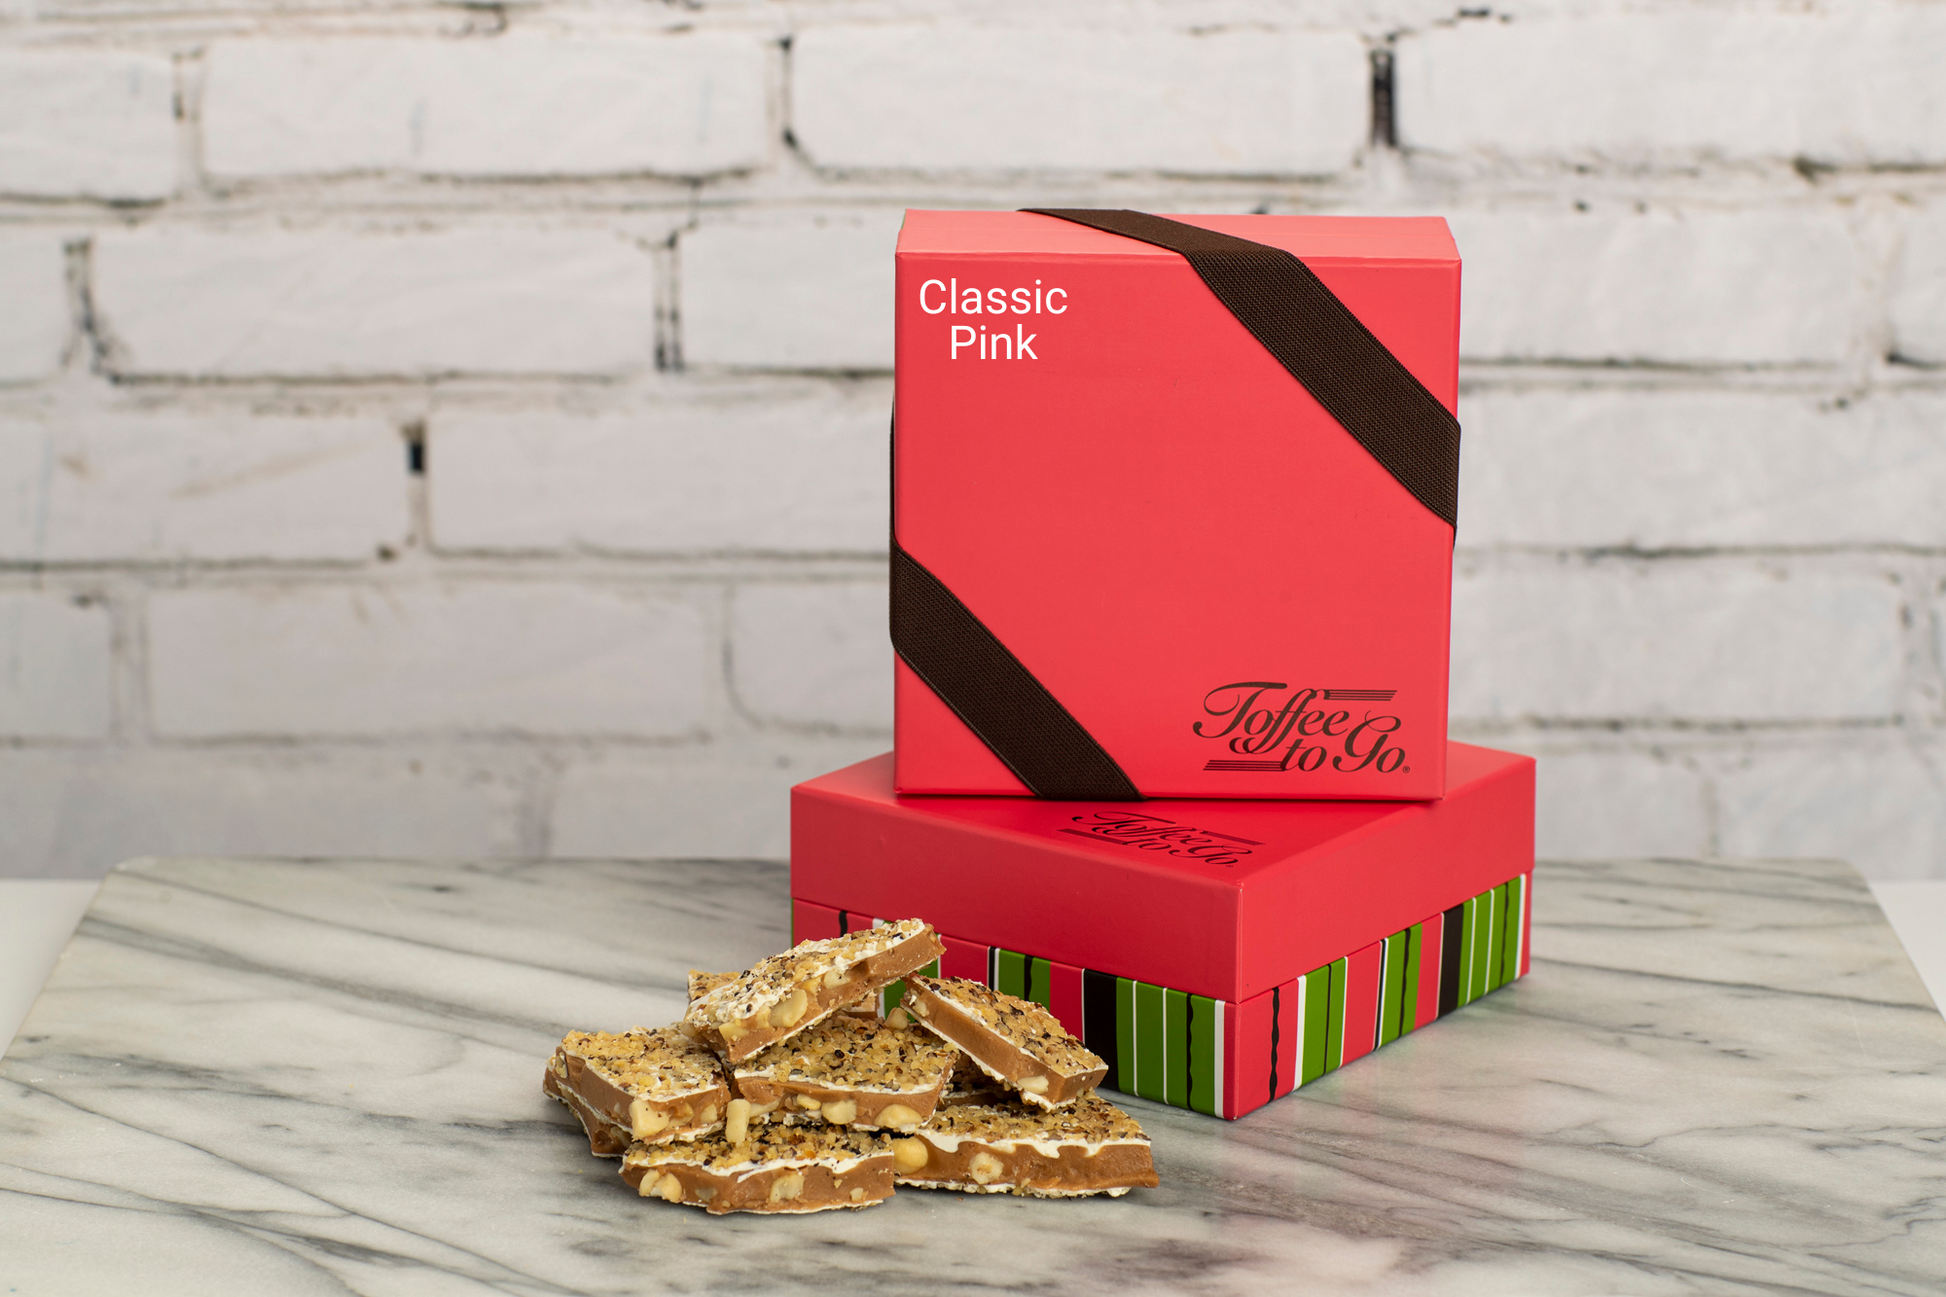 Classic Pink and Brown box with White Chocolate Macadamia Nut Toffee